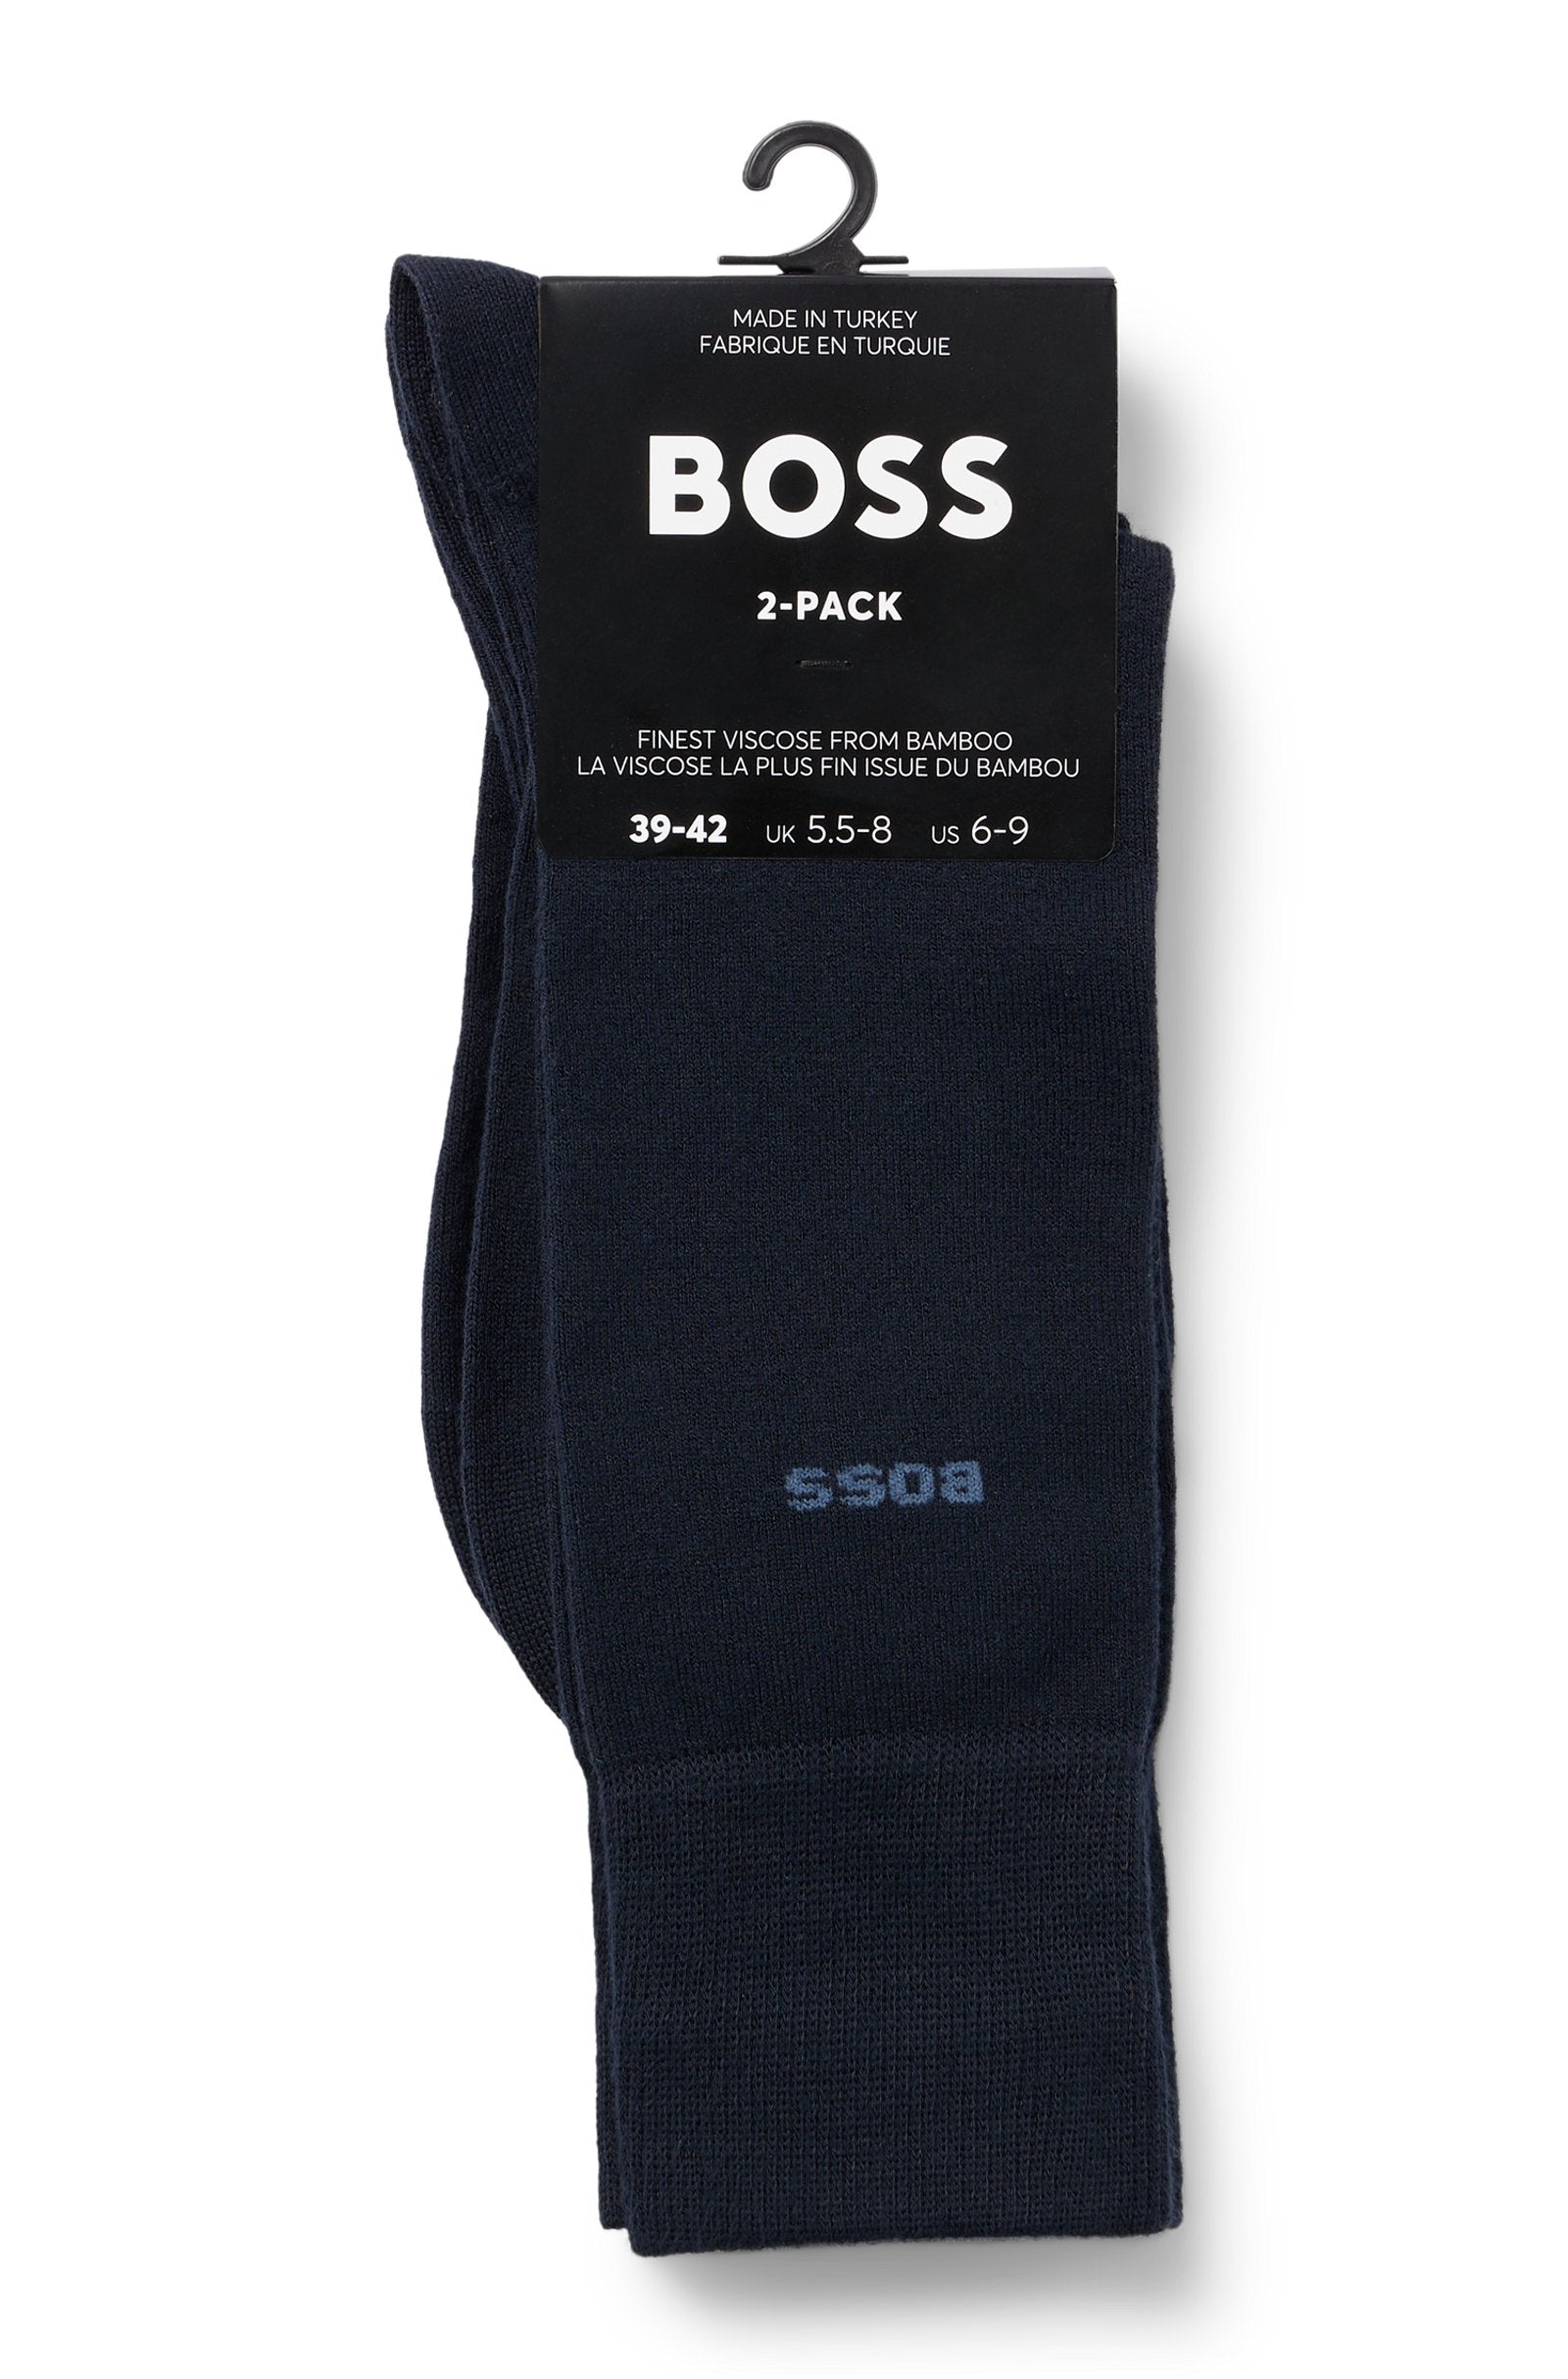 BOSS - 2 Pack Of Bamboo Touch Socks in Stretch Yarns in Dark Blue 50491196 401